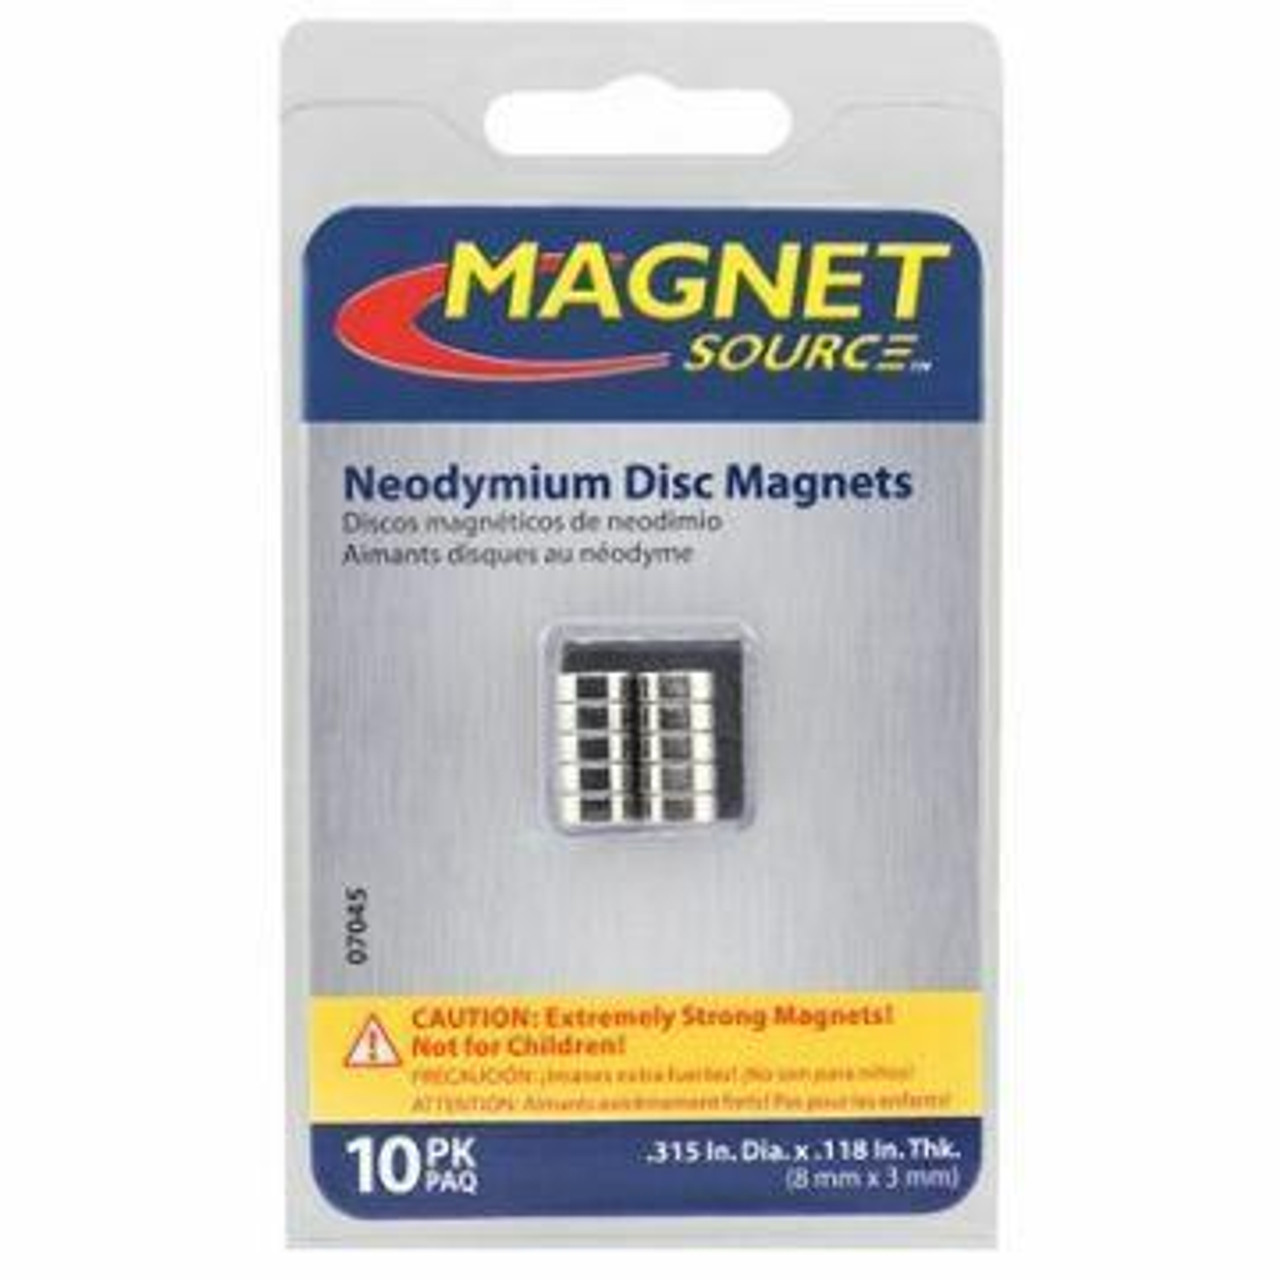 Magnetic Squares, Magnet Tap Strips with Adhesive India